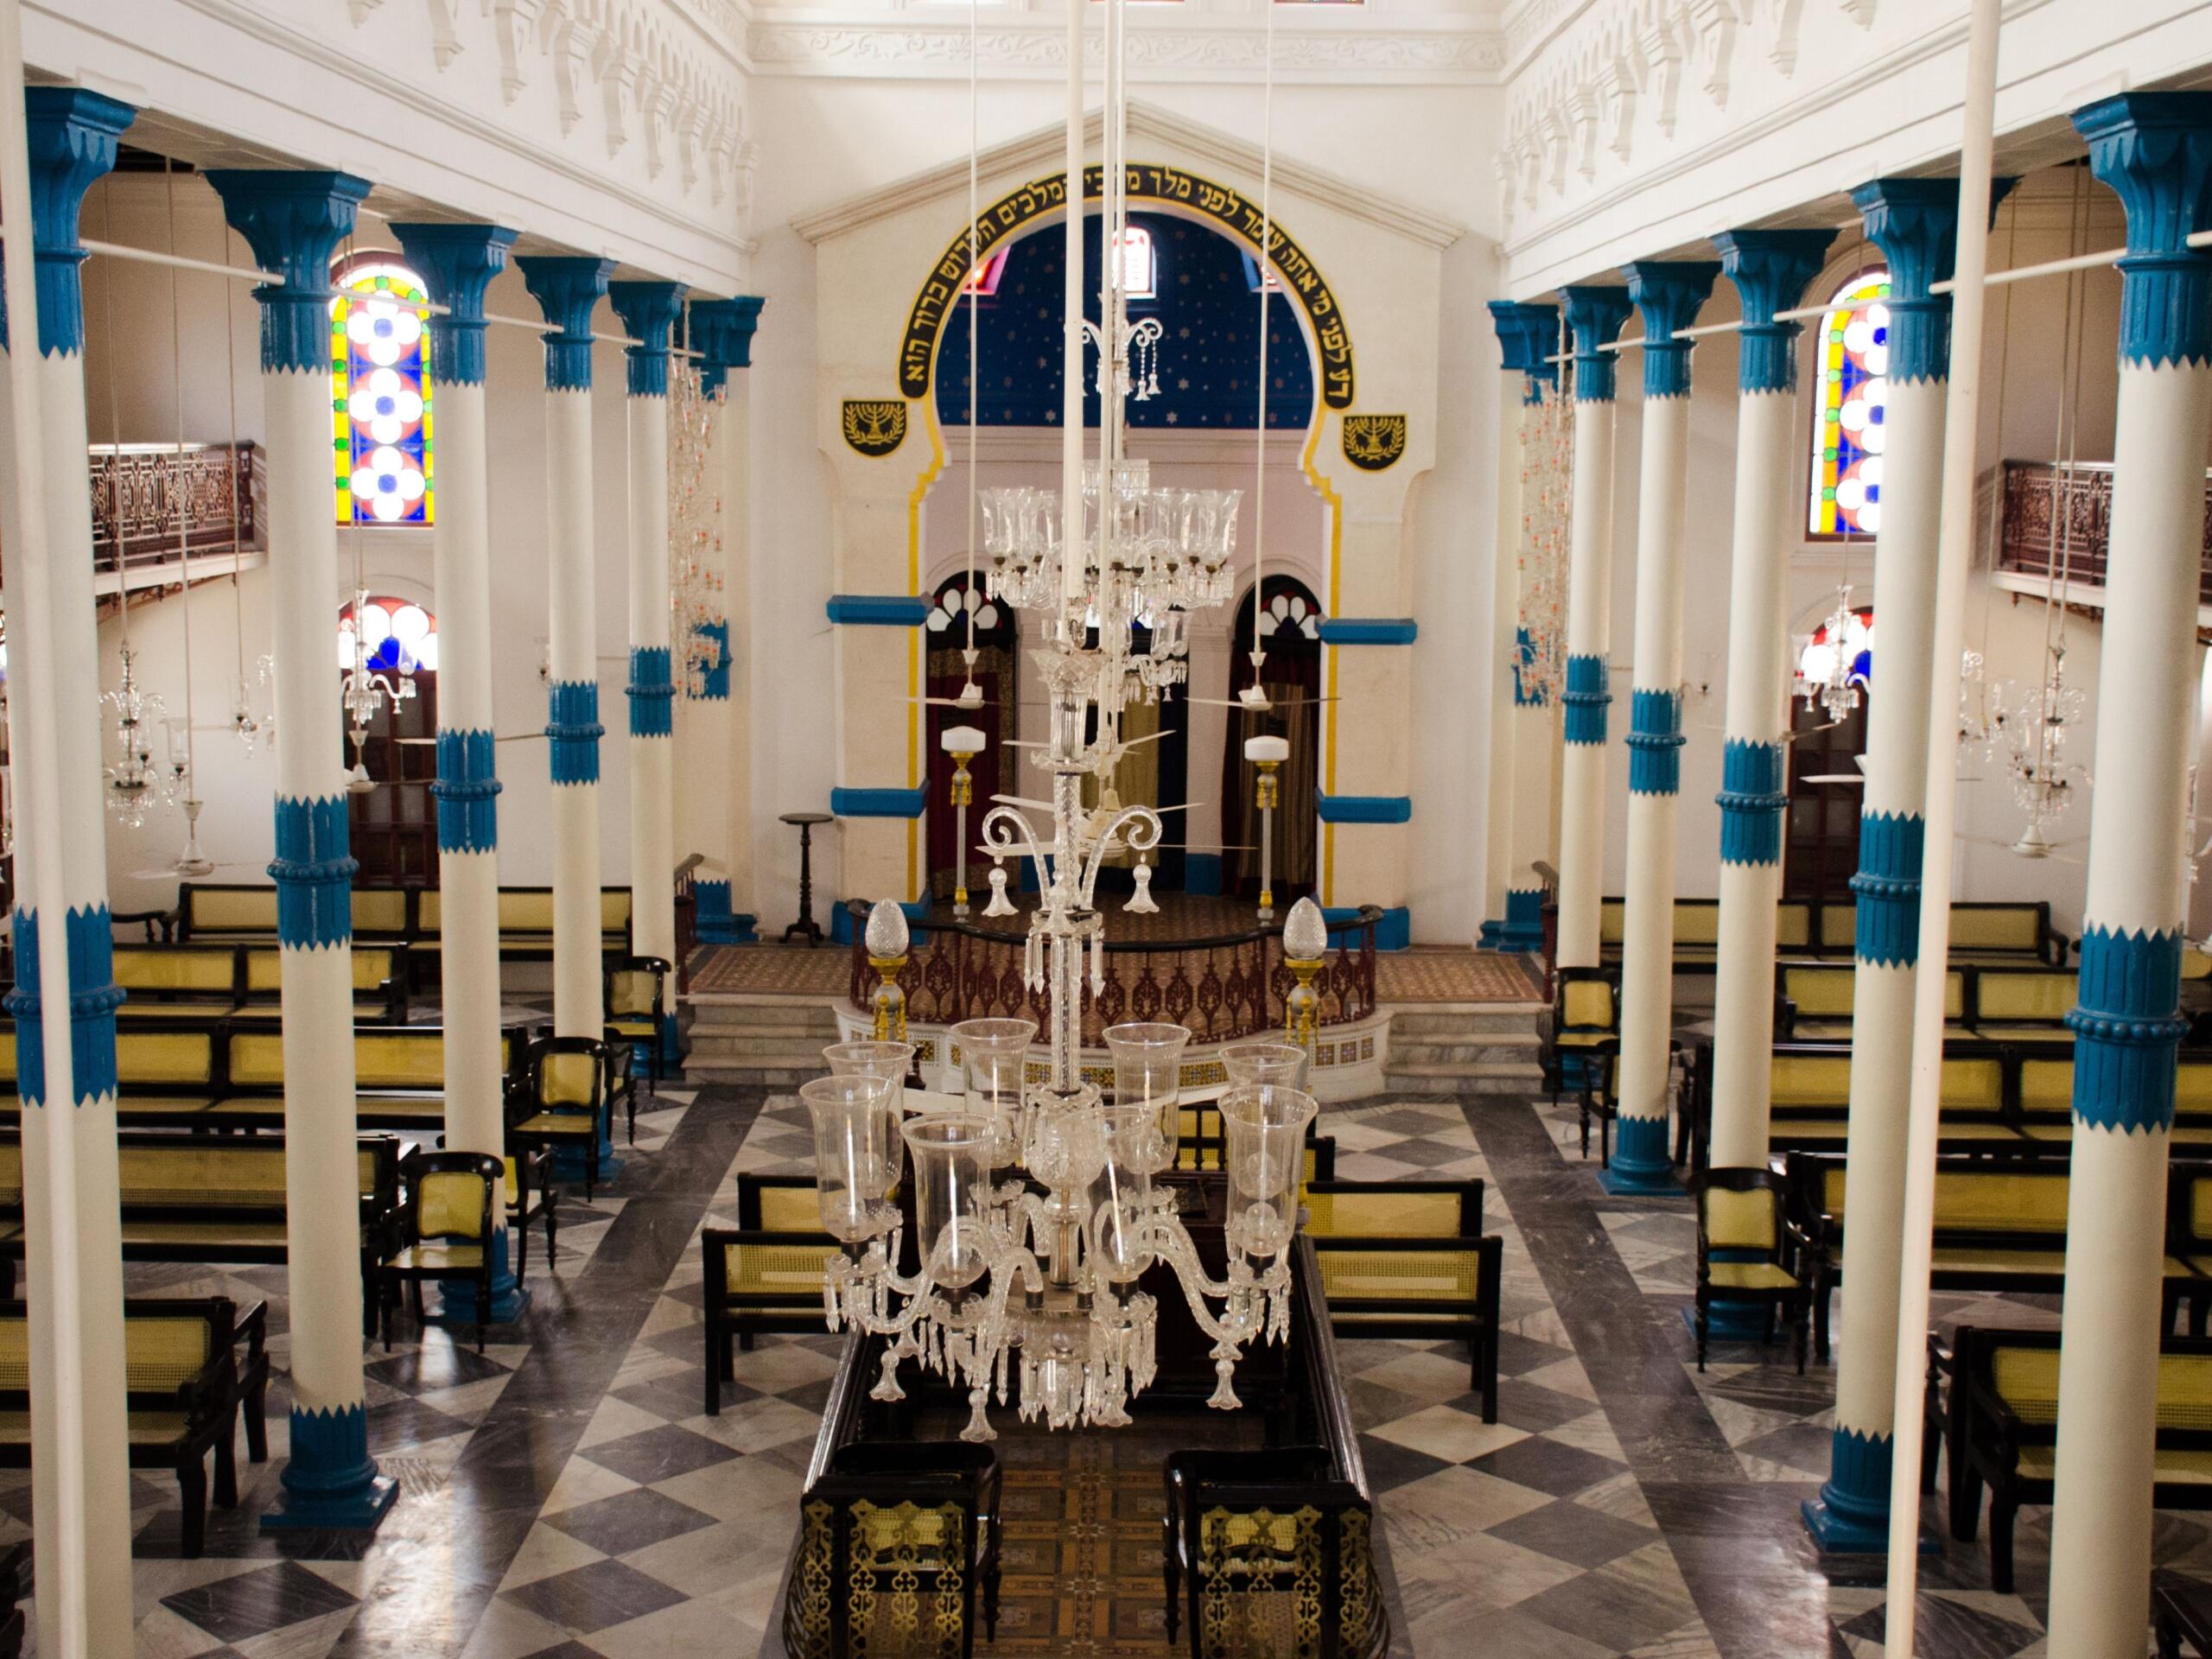 Synagogue in India